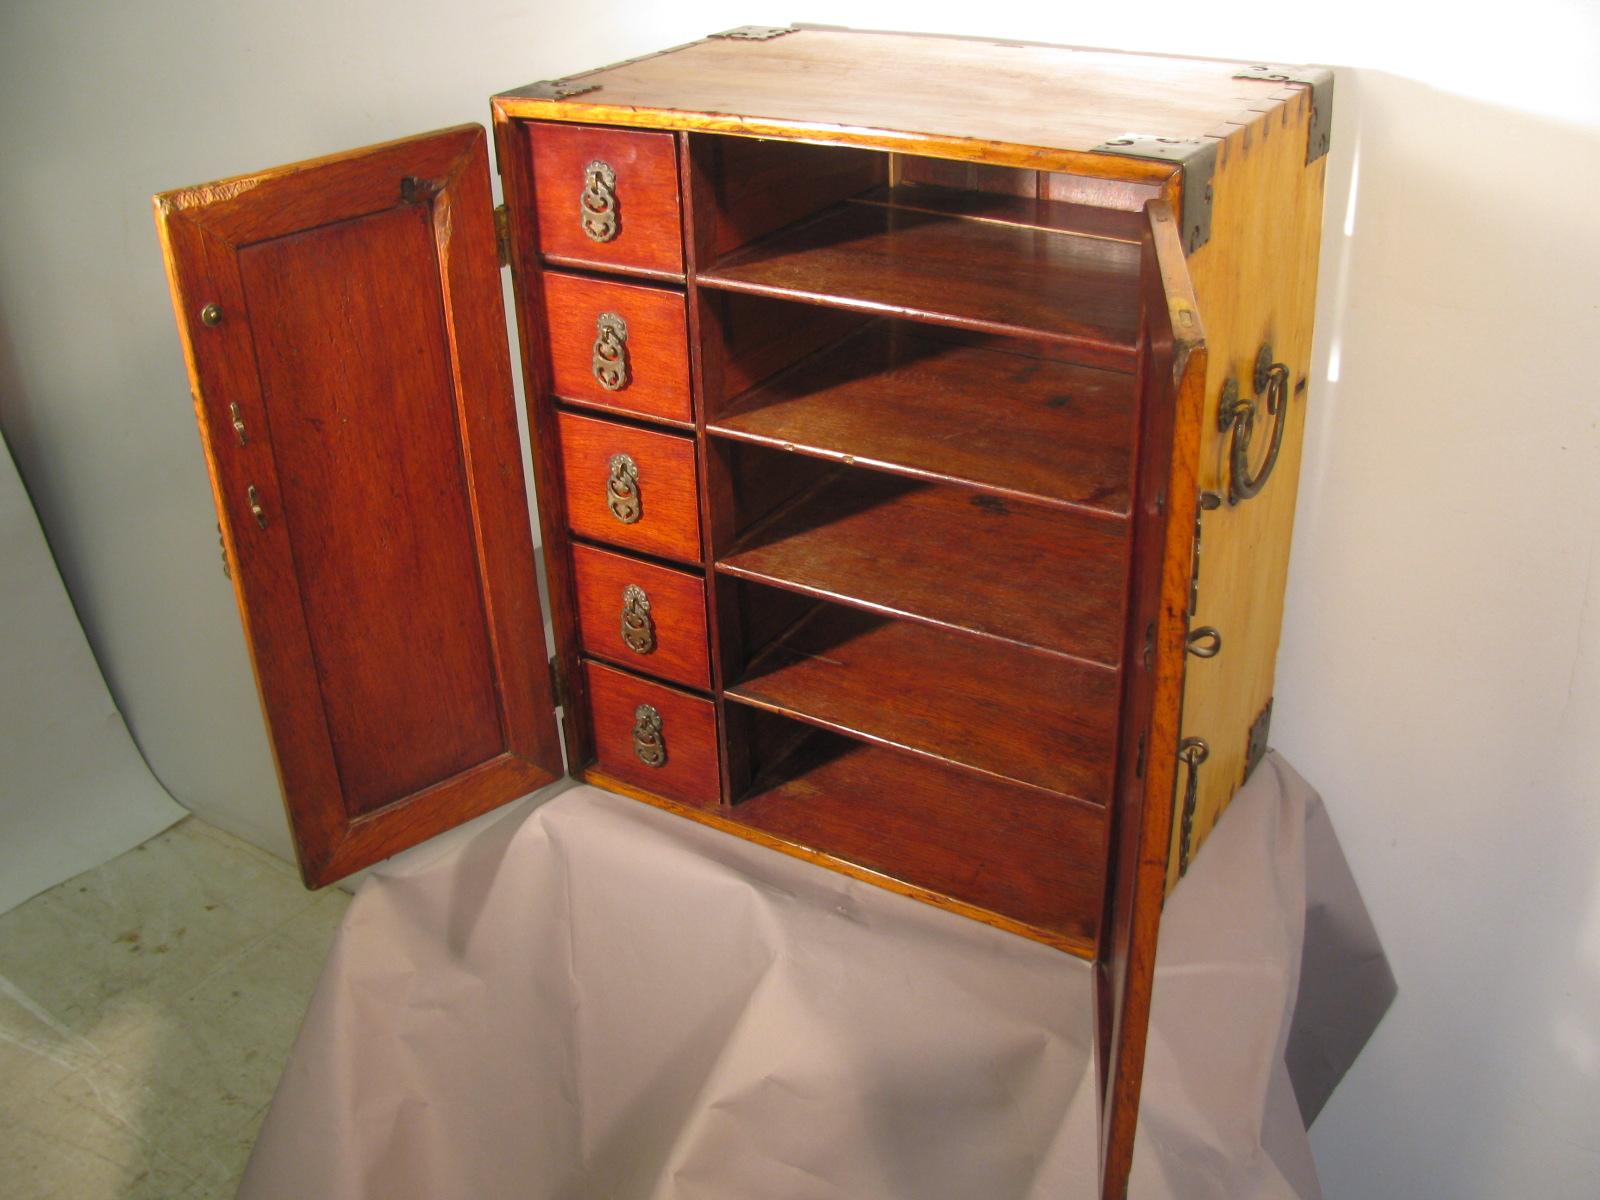 Entirely handmade cabinet, hand wrought and hammered metal hardware. Cabinet is entirely dovetailed and splined. Can be used as a end table, or even mounted on a wall. Interior boxes are 10.5 x 4 x 3 H.